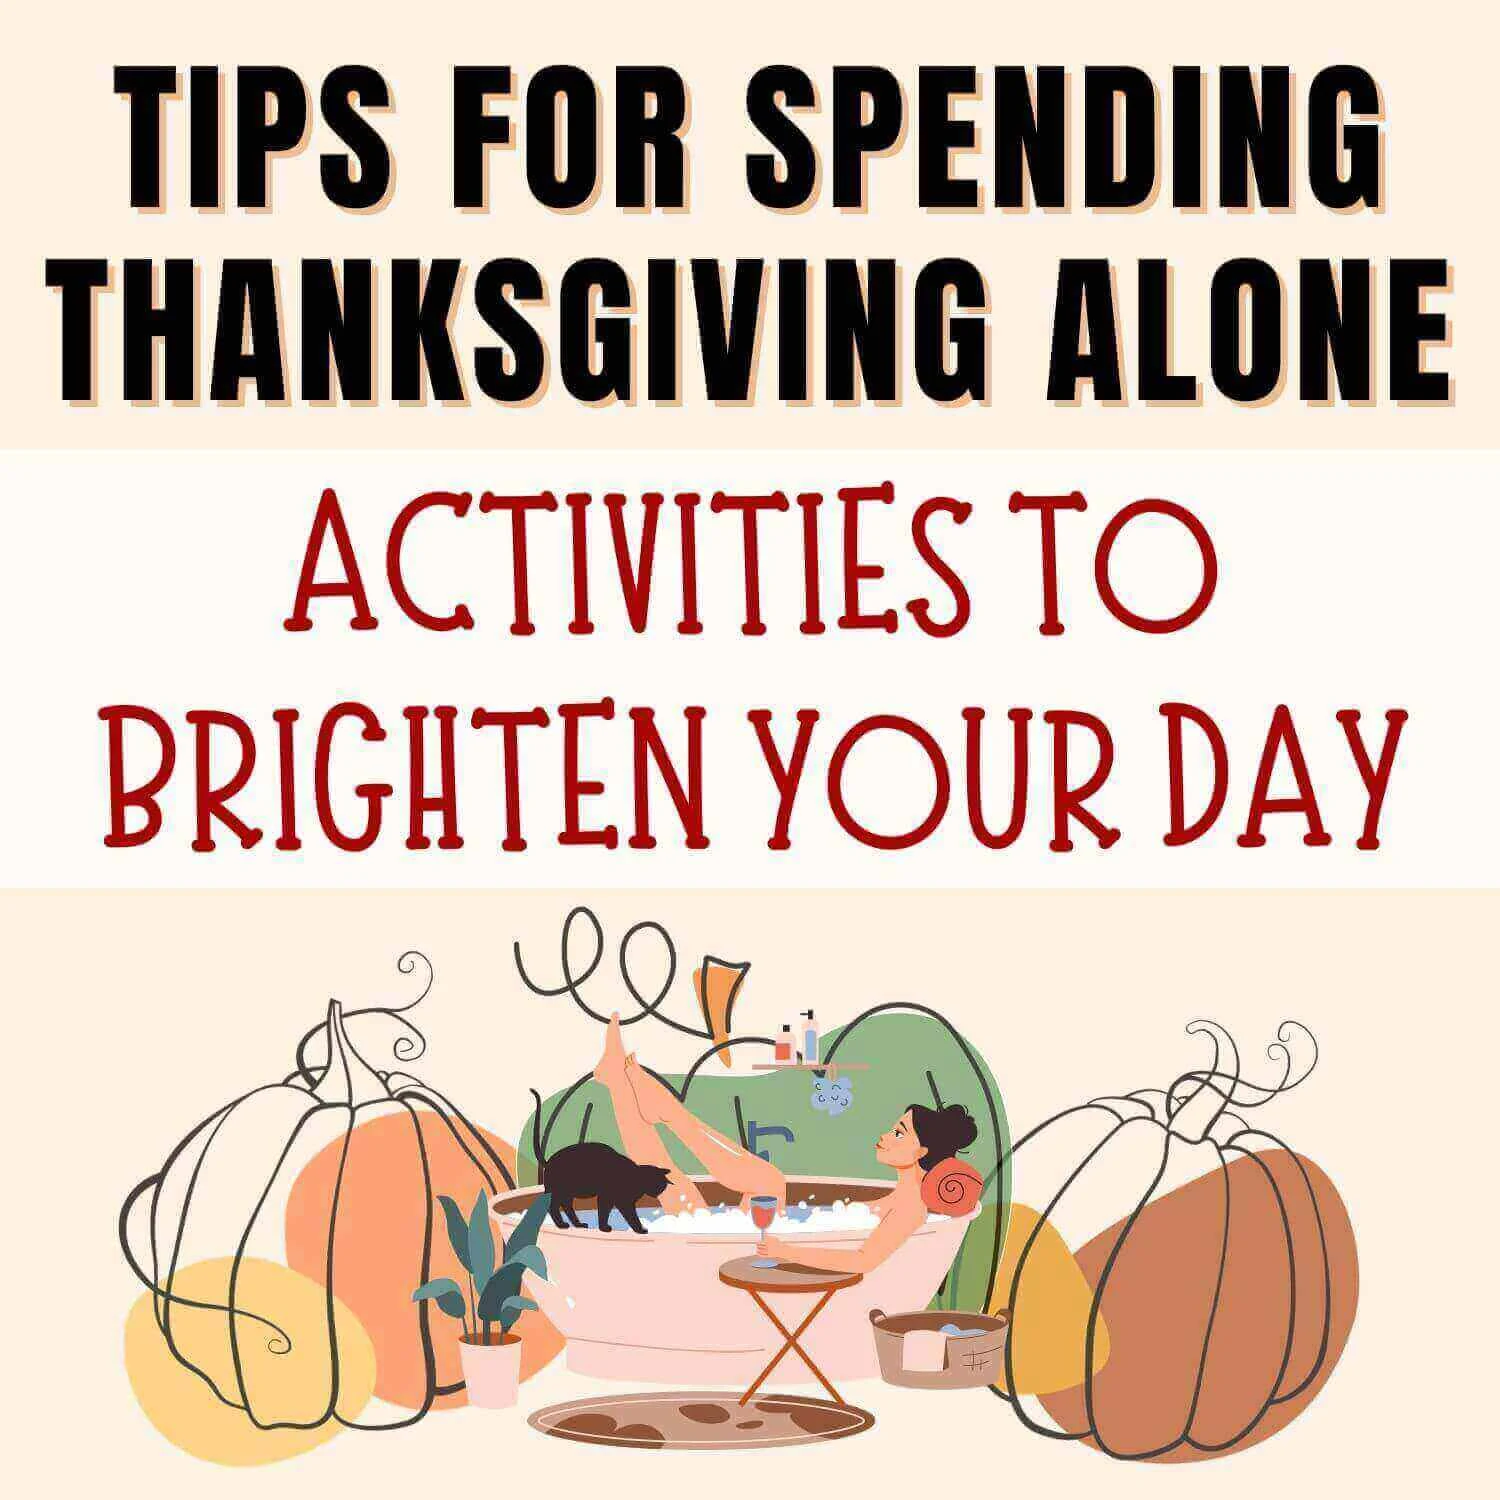 How to Spend Thanksgiving Alone: Tips and Ideas